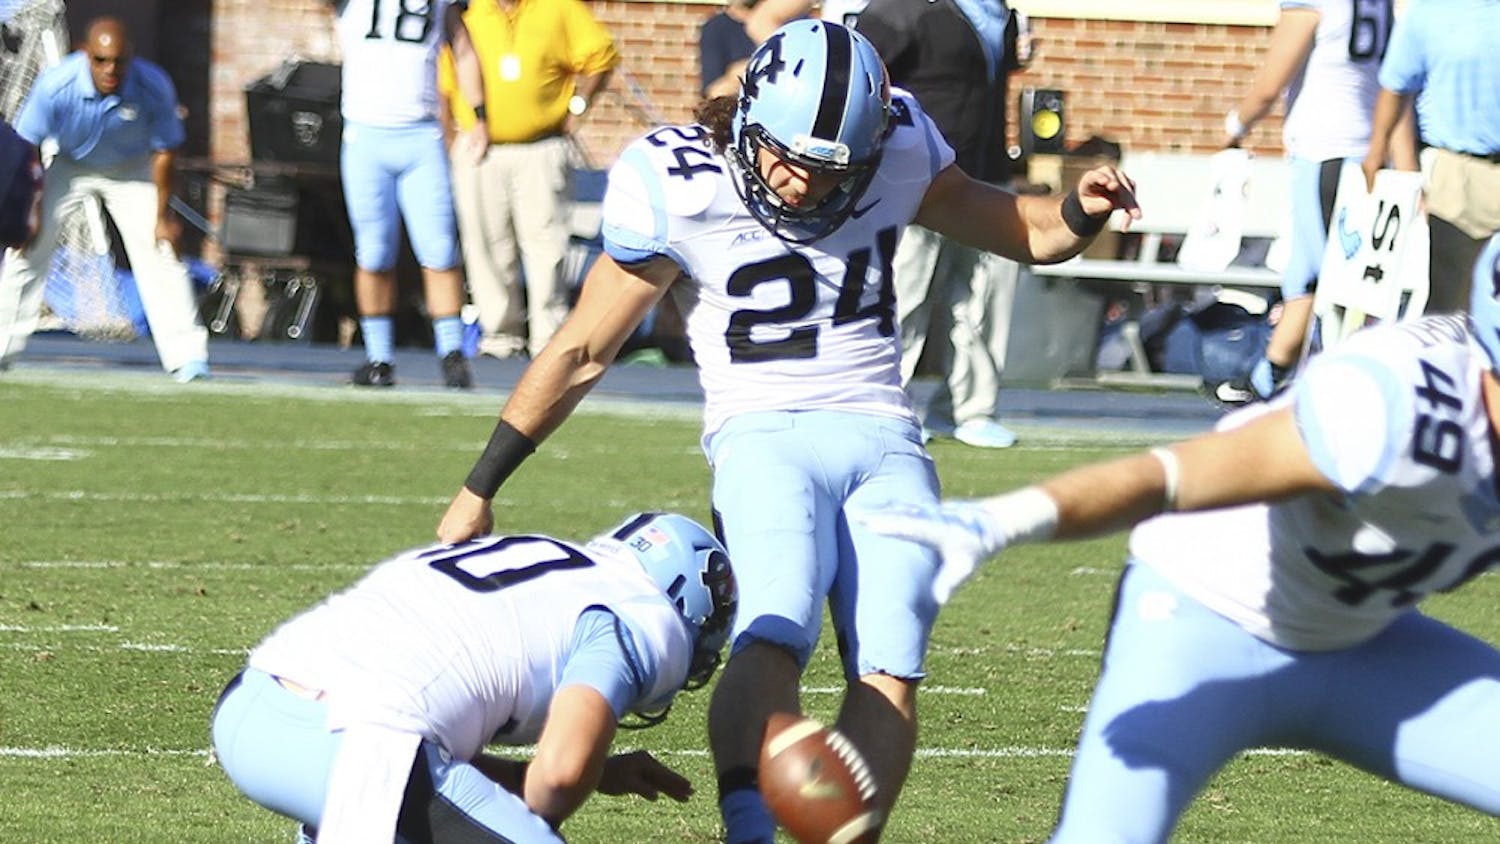 North Carolina kicker Nick Weiler (24) makes a field goal attempt. He is fighting for a starting spot.